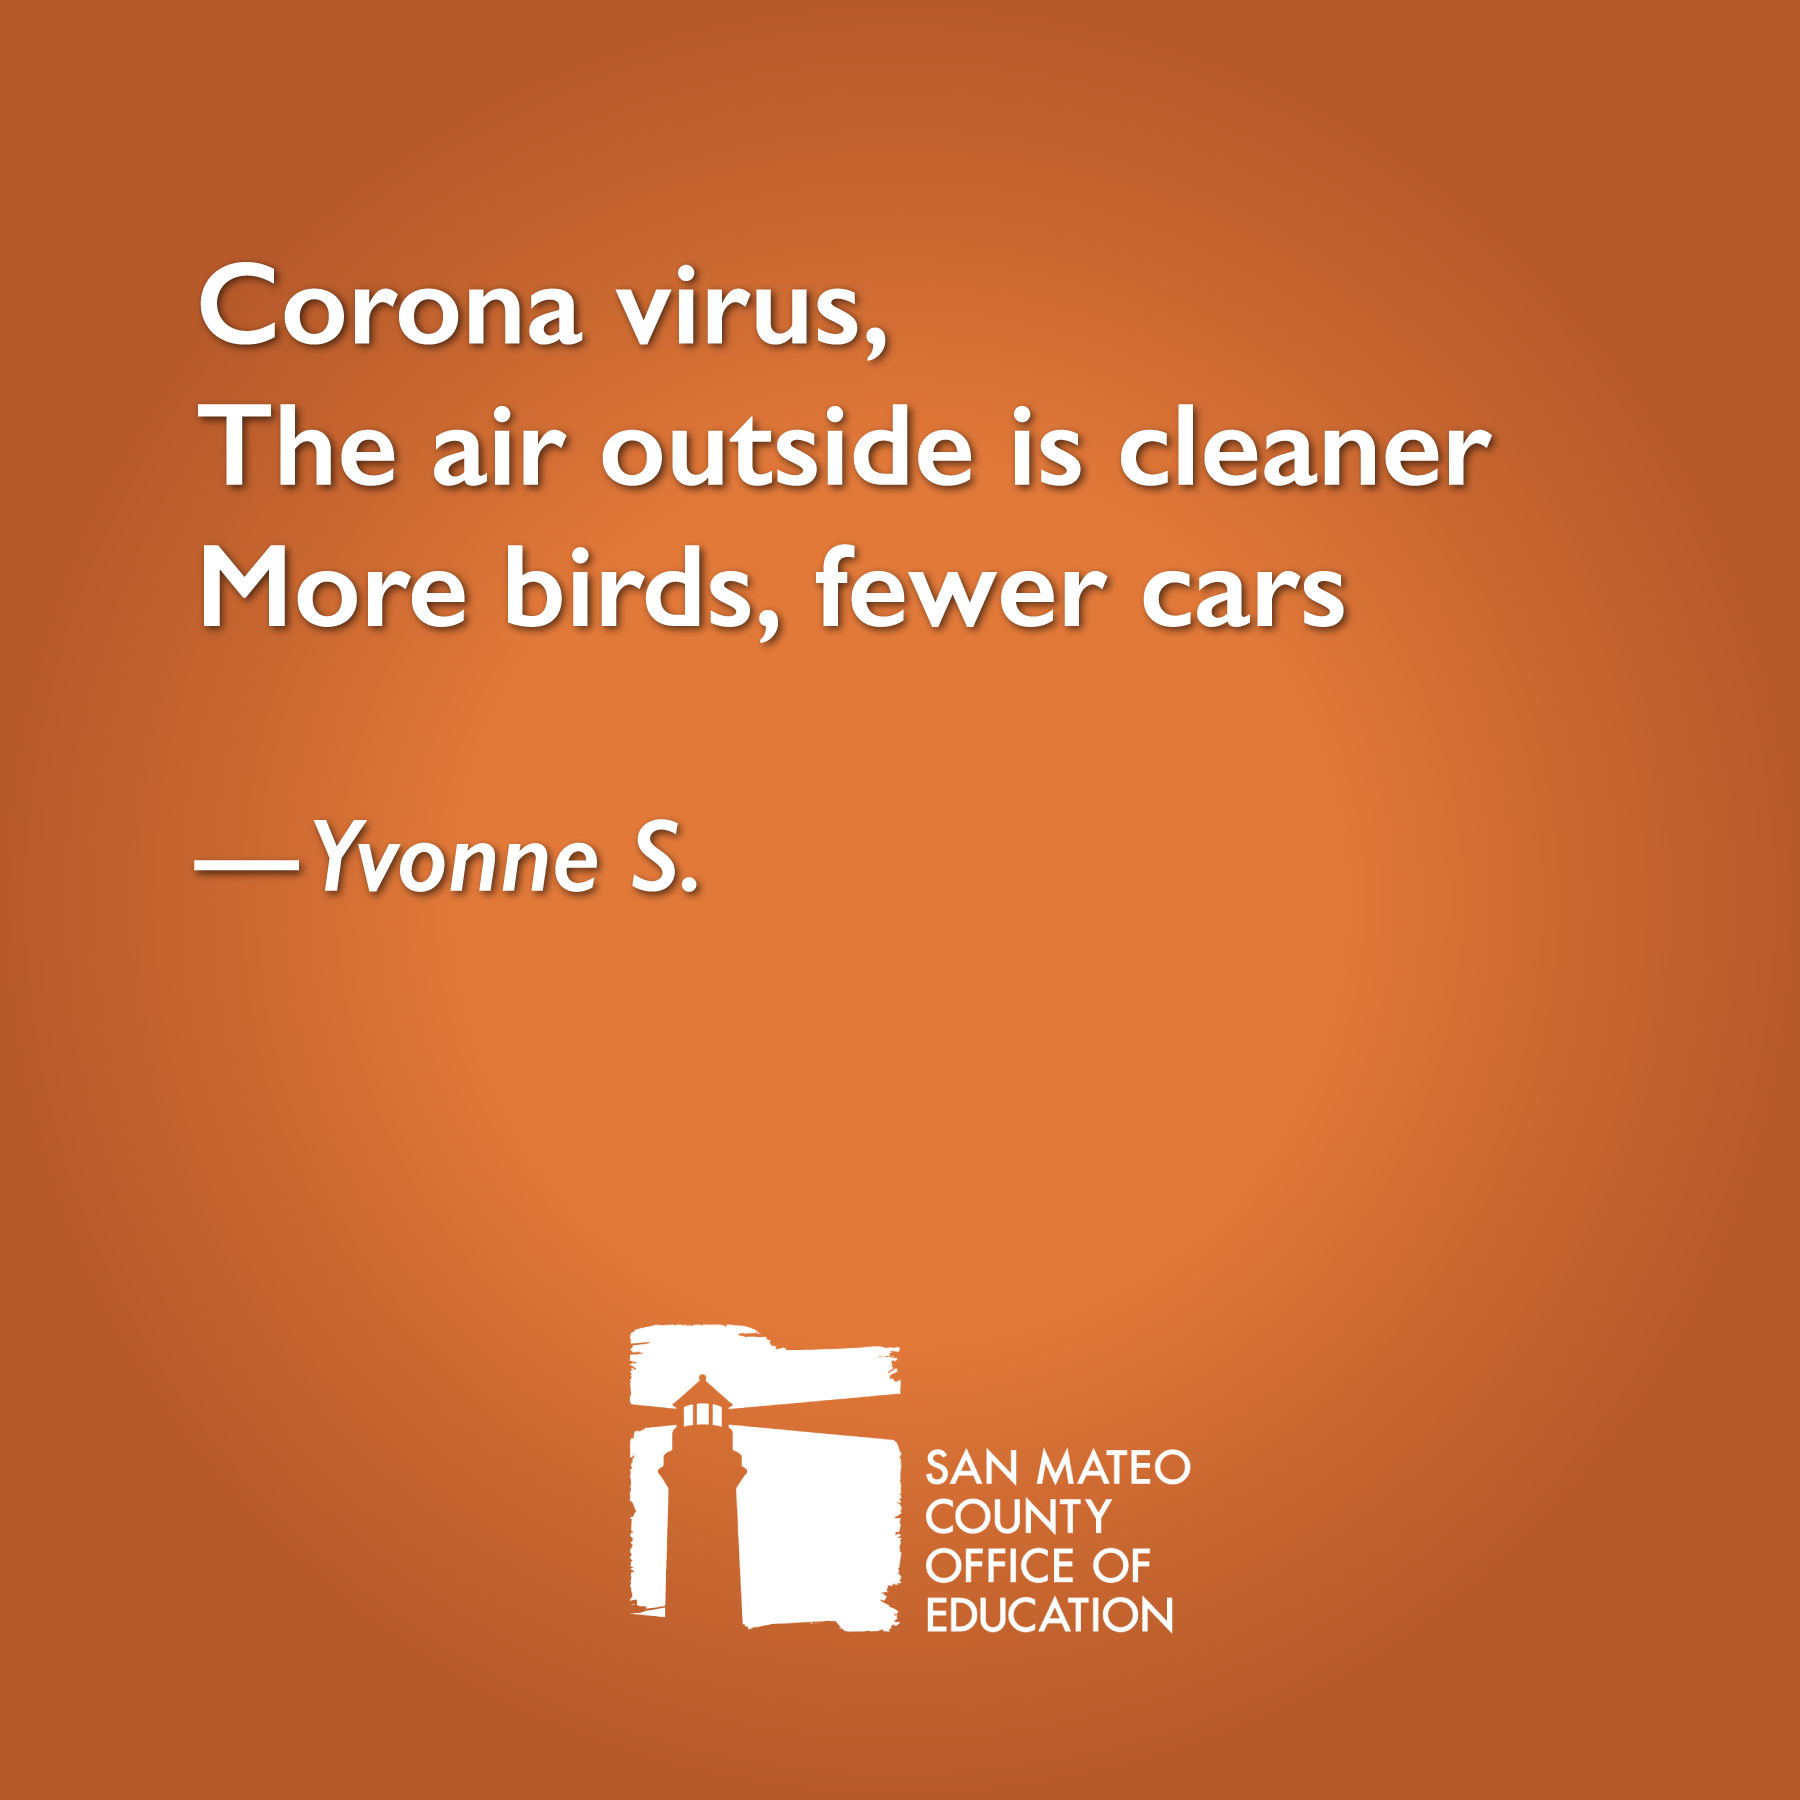 Corona virus, The air outside is cleaner More birds, fewer cars. Written by Yvonne S.